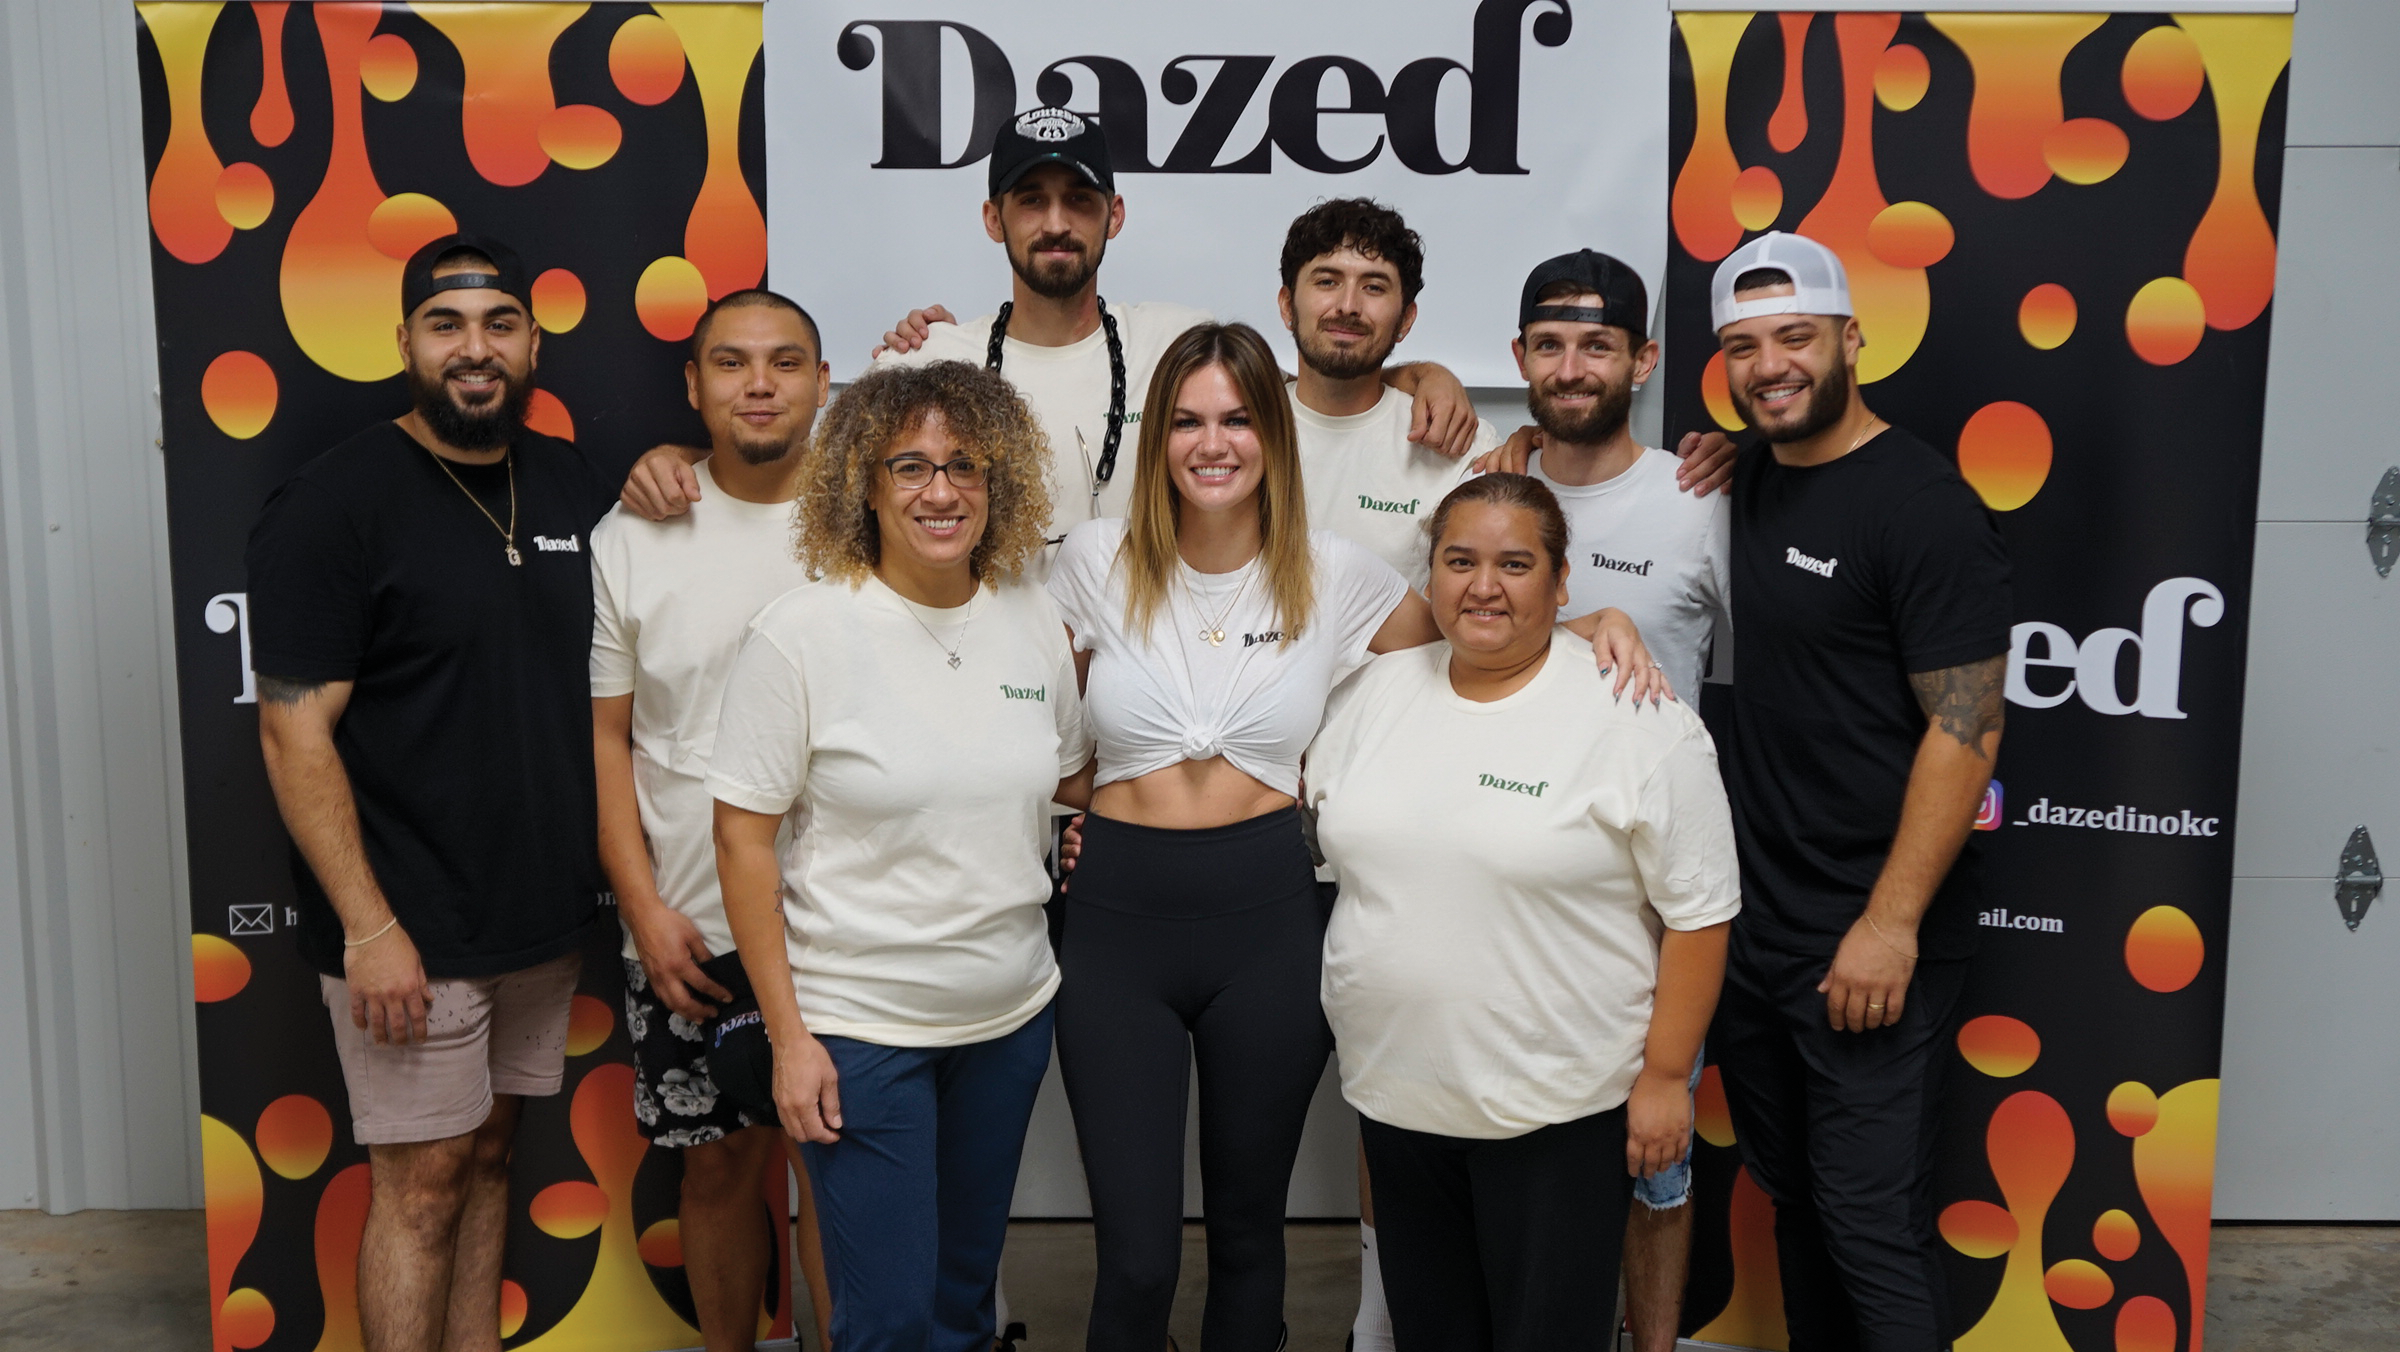 Expanding The Circle: DAZED in OKC